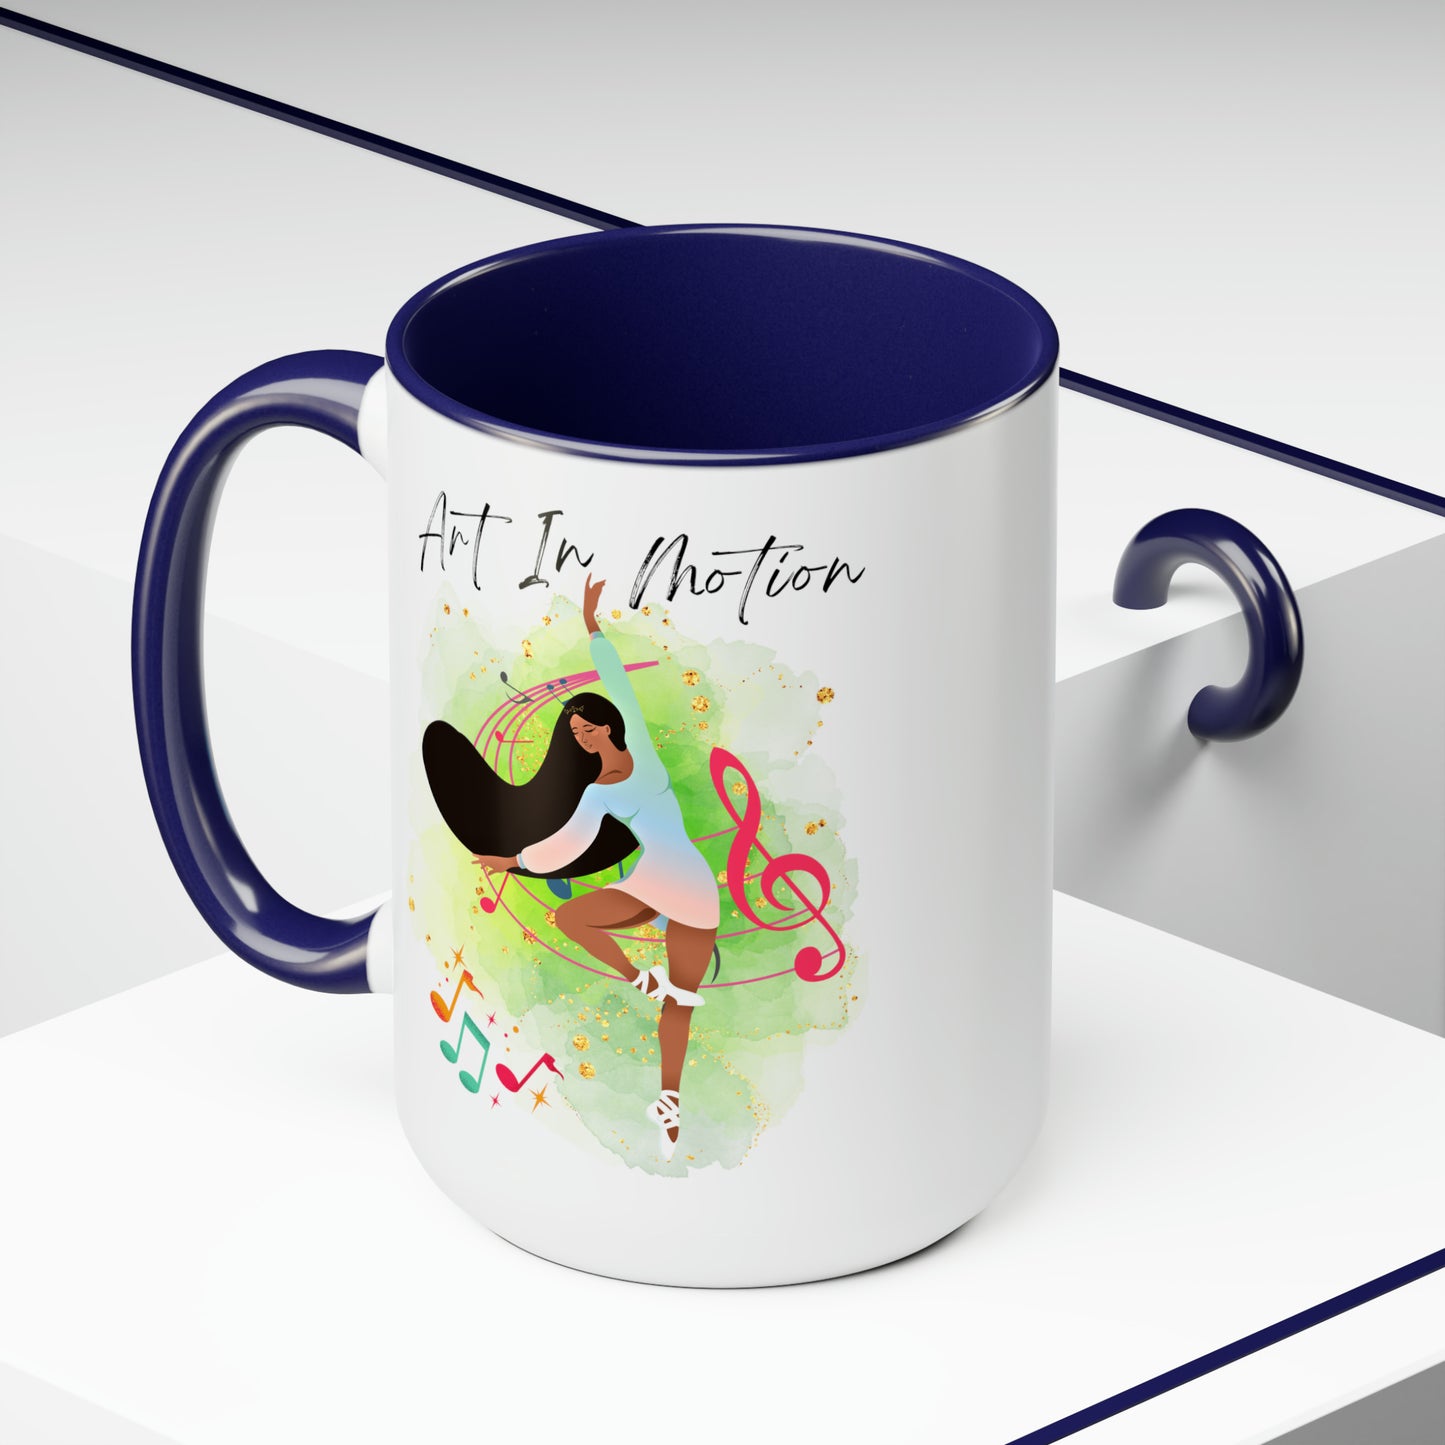 Two-Tone Coffee Mugs - Ballerina of African Descent - Art in Motion